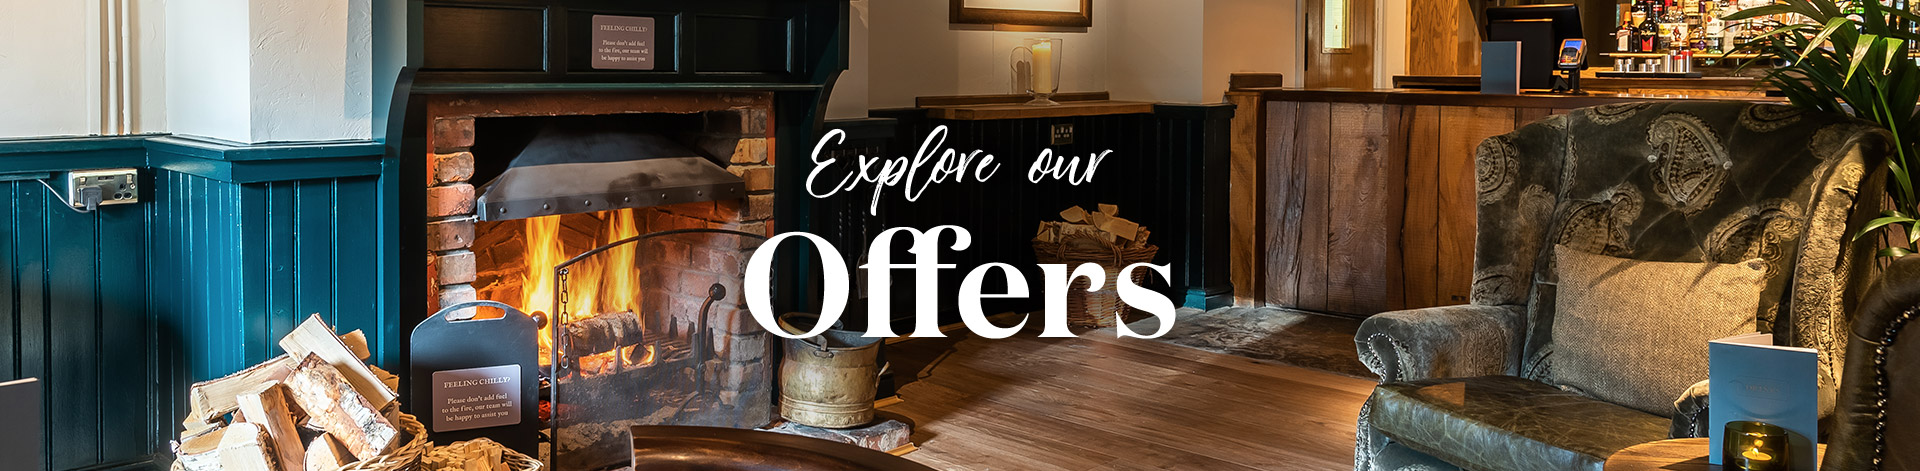 Our latest offers at The Sandpiper